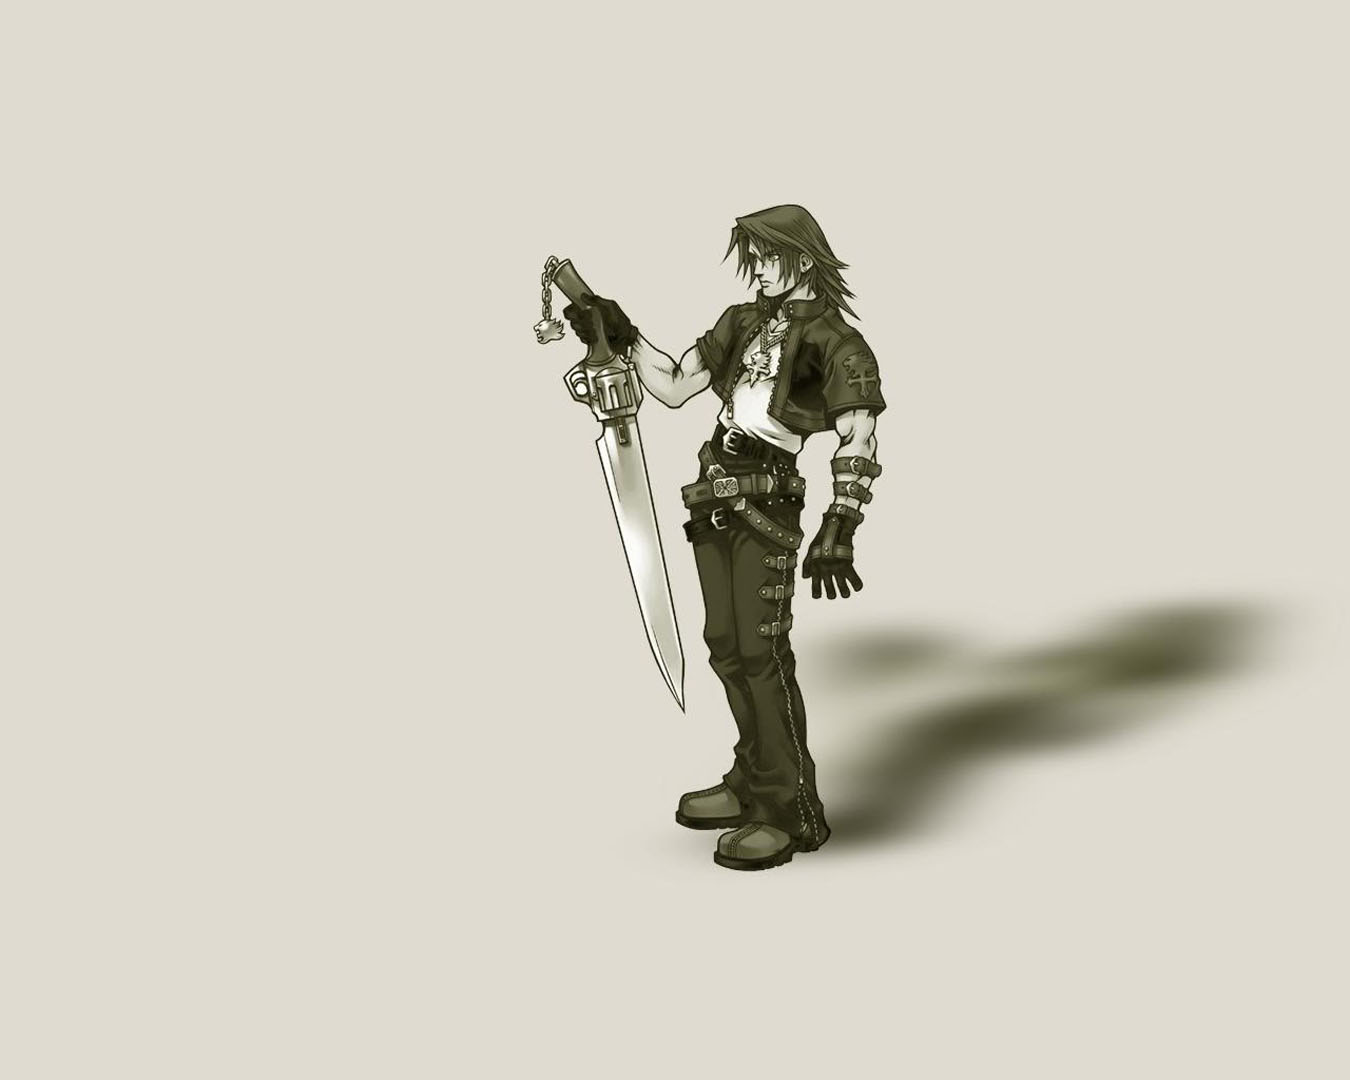 Squall Leonhart Rpg Games Wallpaper Image Featuring Final Fantasy